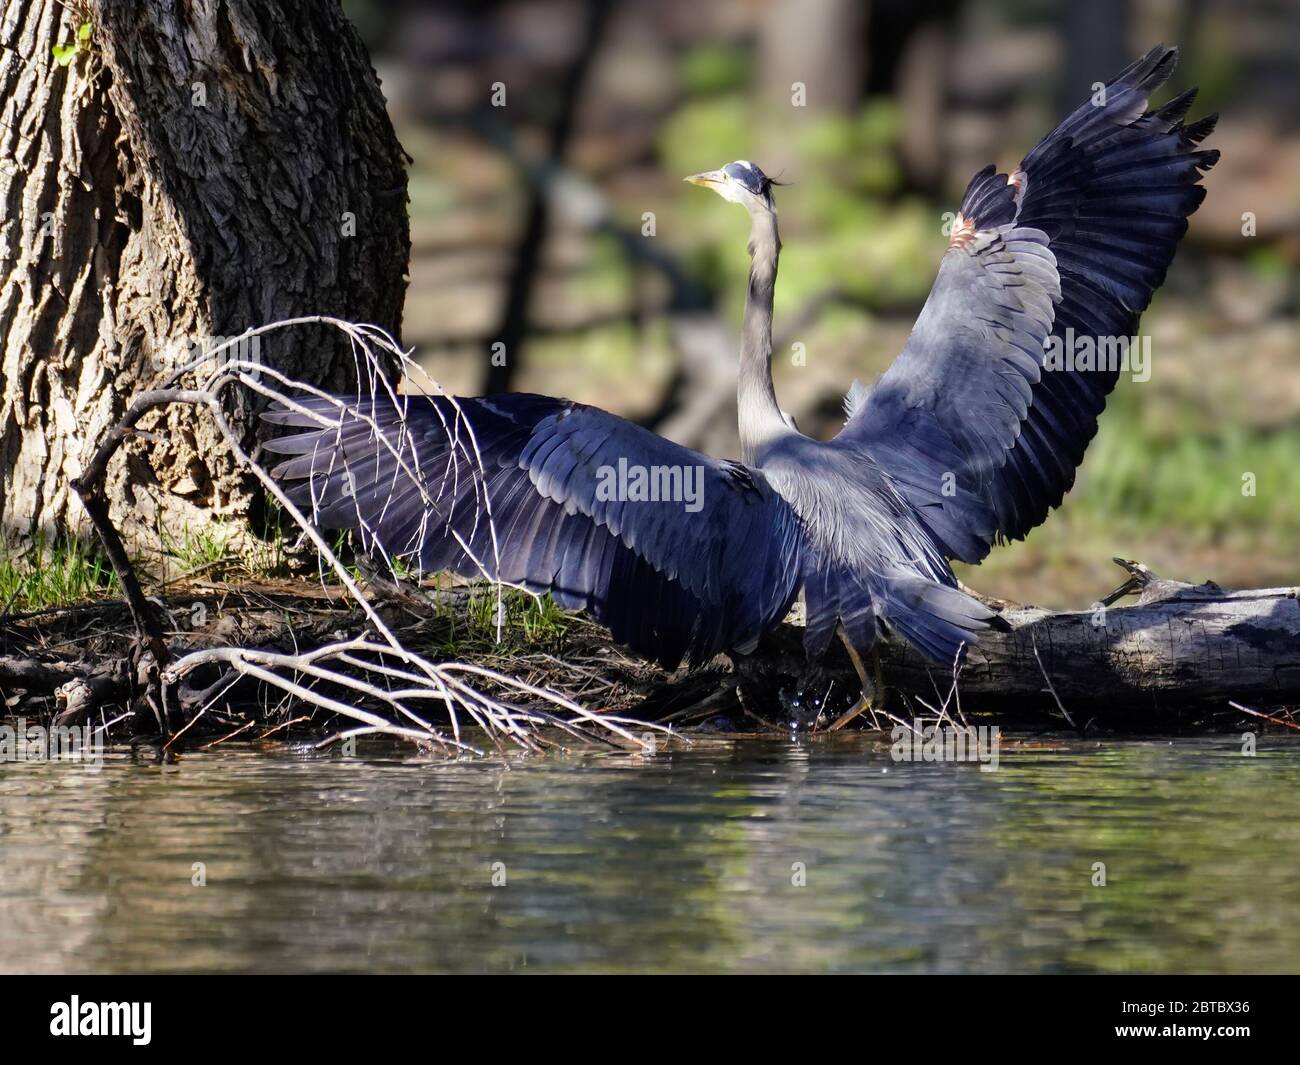 A Great Blue Heron stands in the shallows of the lake with wings outstretched. Stock Photo